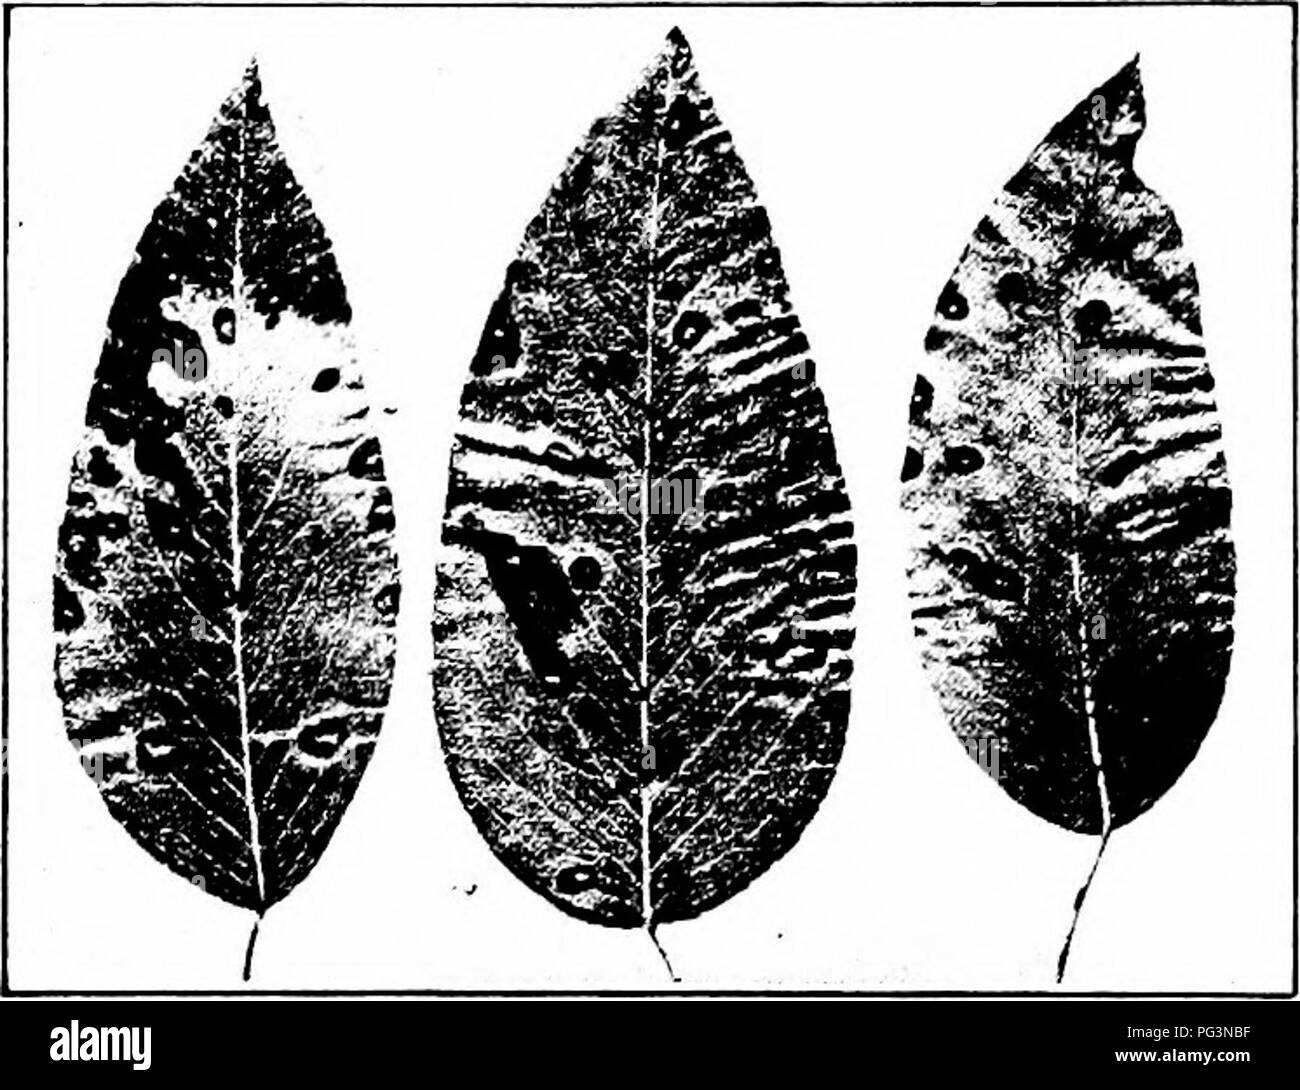 . Manual of fruit diseases . Fruit. 338 MANUAL OF FRUIT DISEASES was observed several years ago that the Bosc, Sheldon, Seckel, Anjou, Bartlett and others are injured more than the Flemish, Clairgeau and Duchess. The Kieffer, Lawrence and Mount Vernon are relatively resistant to leaf-spot. In the nursery, budded pear-stock, after the first year, may show occasional lesions, but budded stock of two or more years is often badly injured late in the simamer. Symptovis. Only the leaves are affected. The mature spots are recog- nized by their well-defined angular margins and their grayish white cent Stock Photo